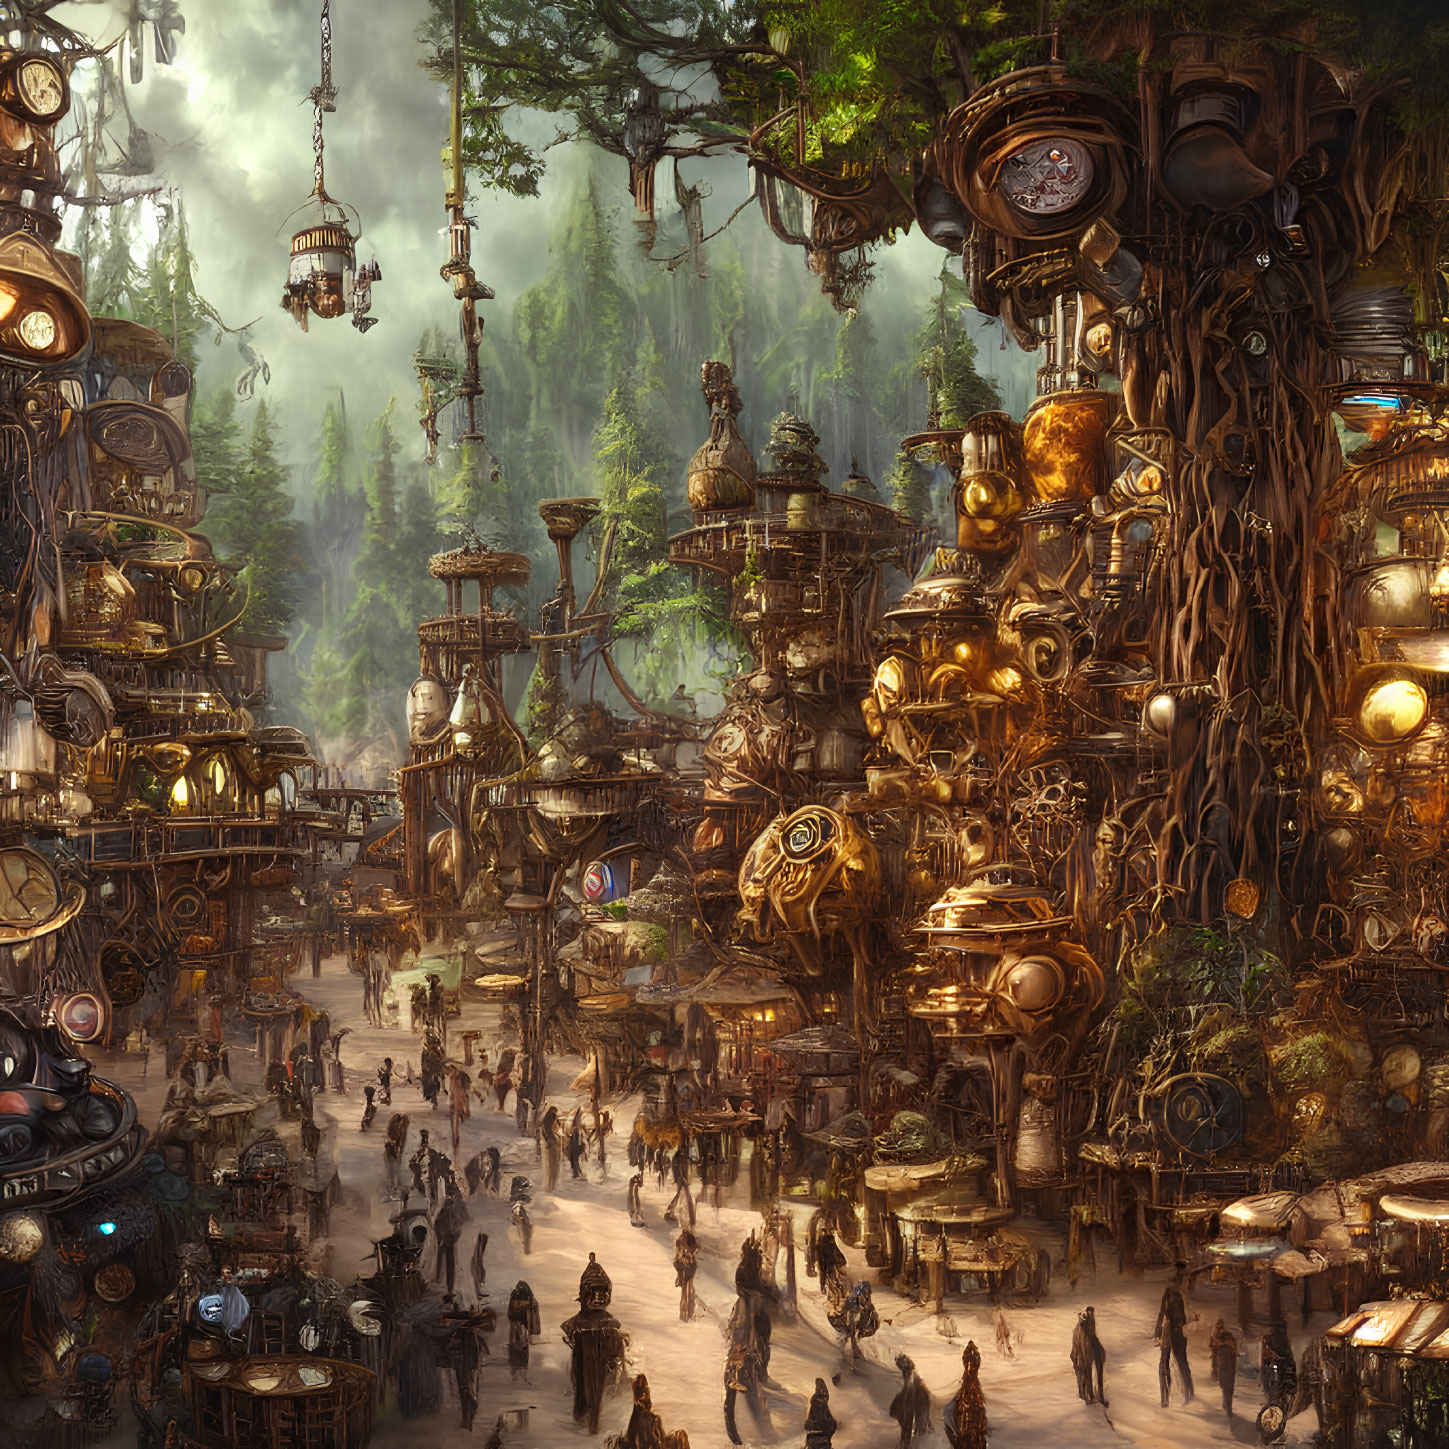 Intricate Steampunk City Among Forest with Metal Towers and Crowds